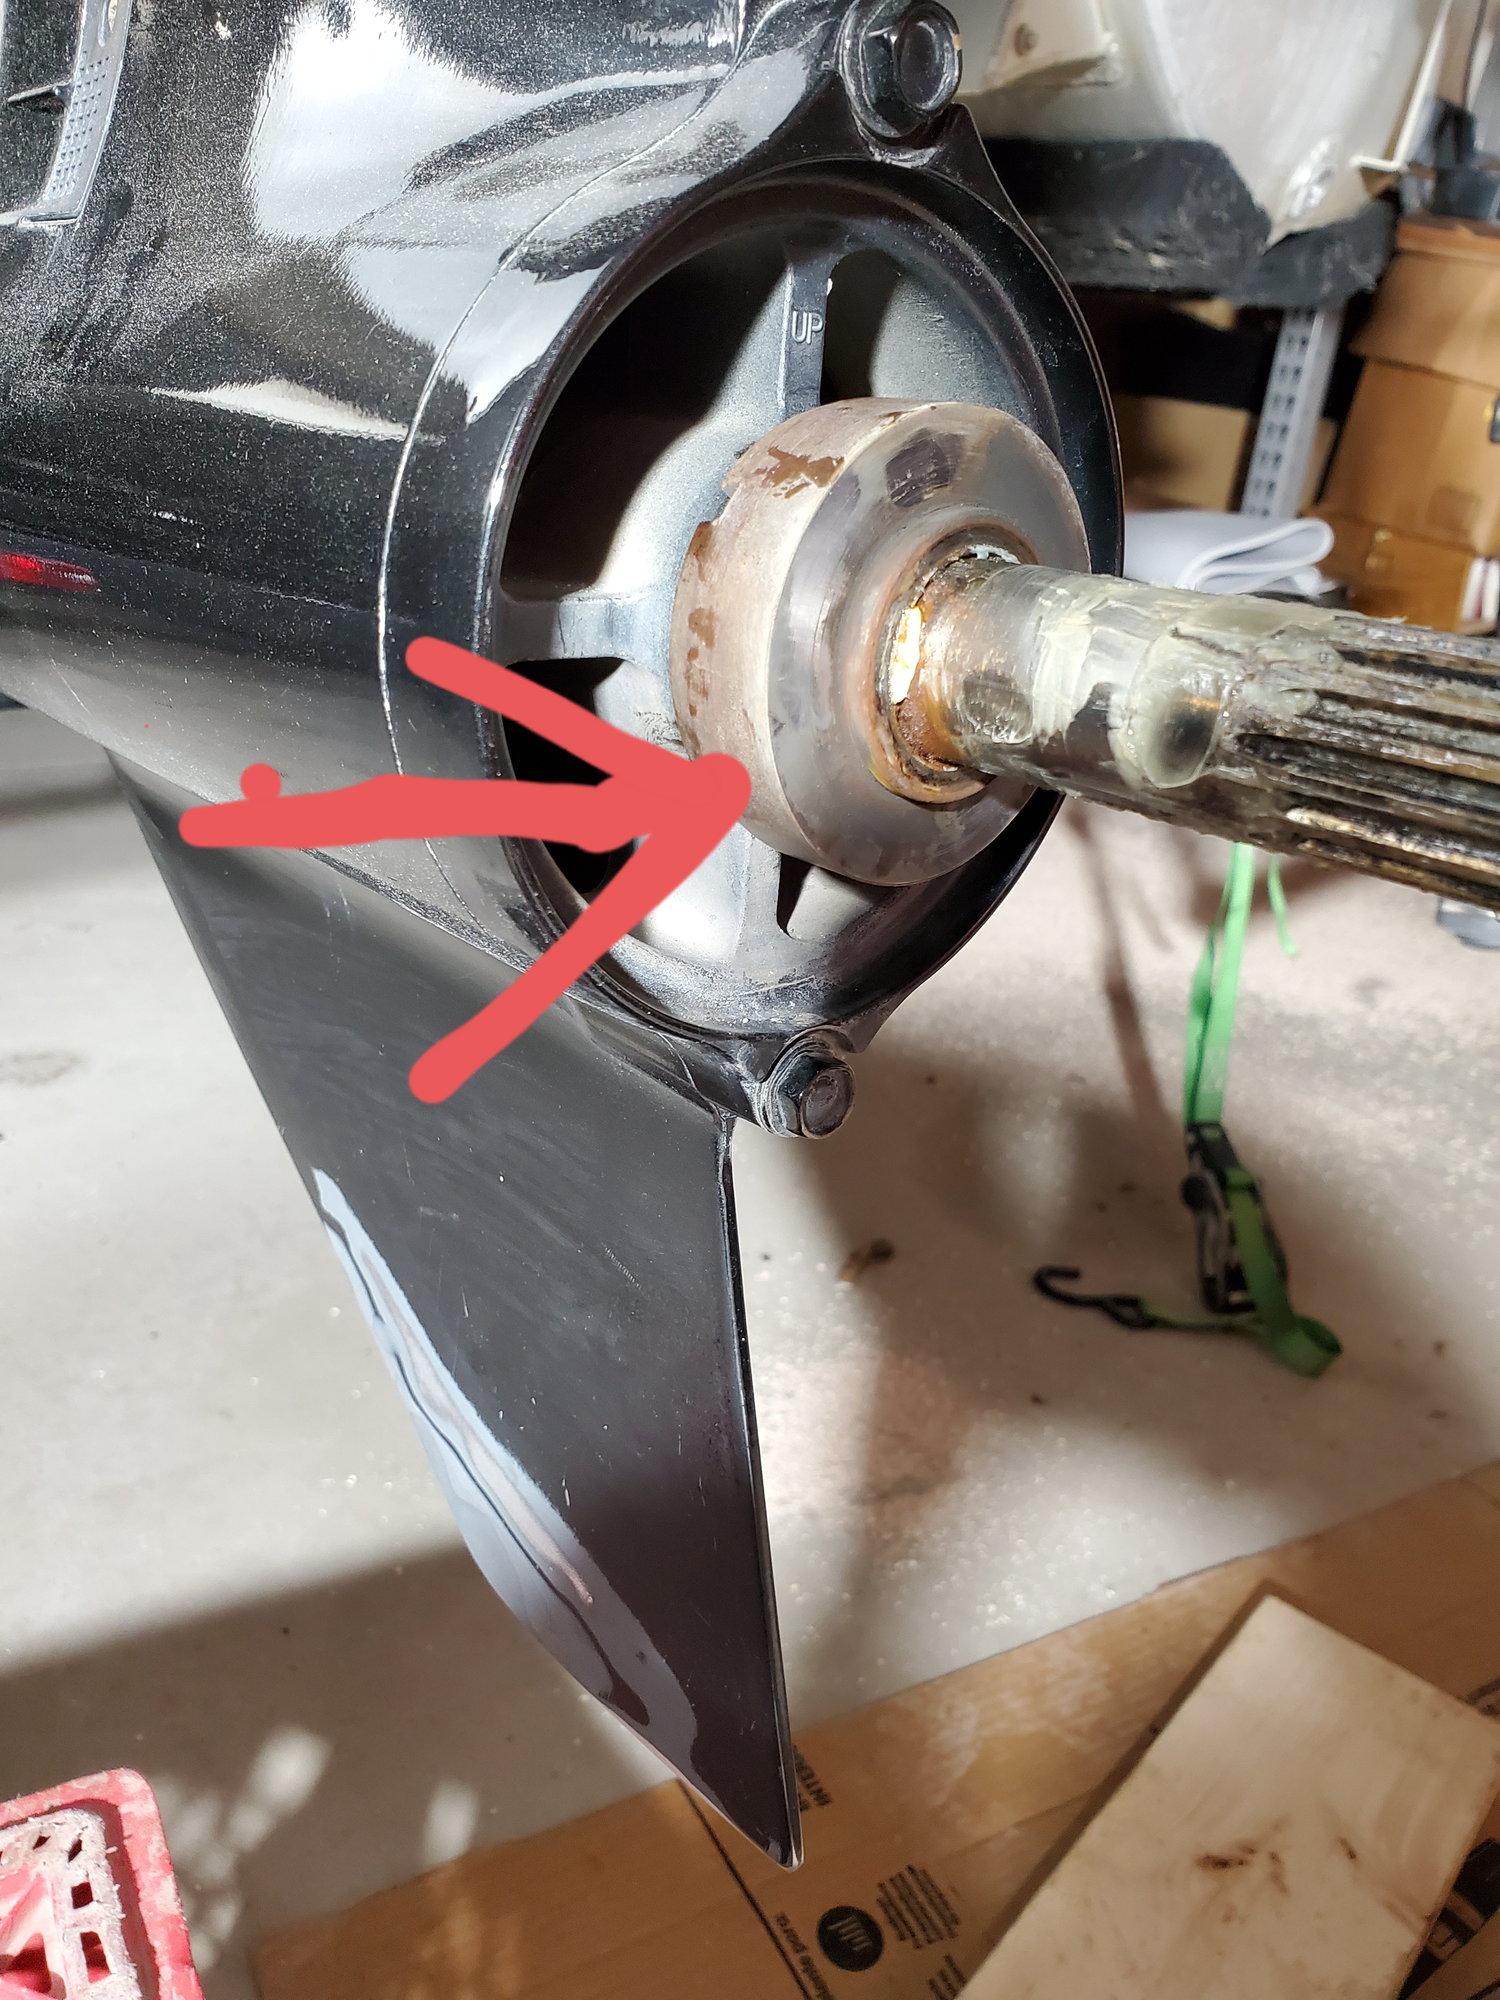 Removing fishing line from Suzuki outboard - The Hull Truth